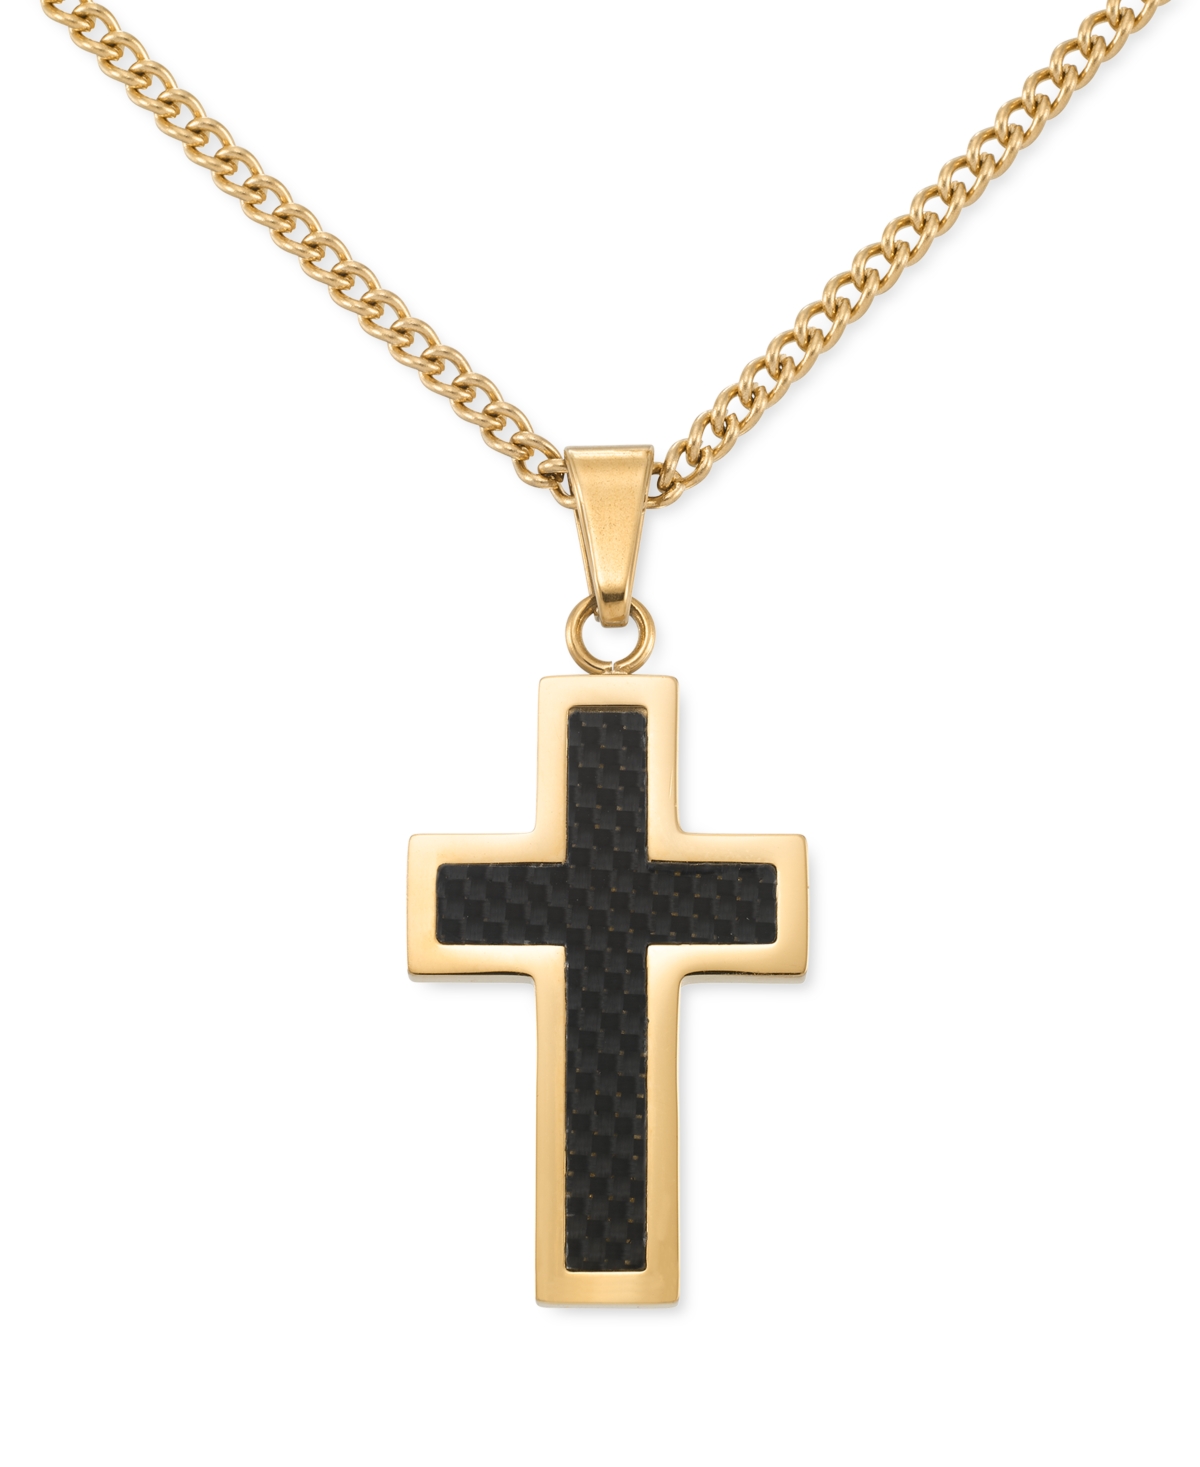 Smith Black Carbon Fiber Cross 24" Pendant Necklace in Gold-Tone Ion-Plated Stainless Steel - Black